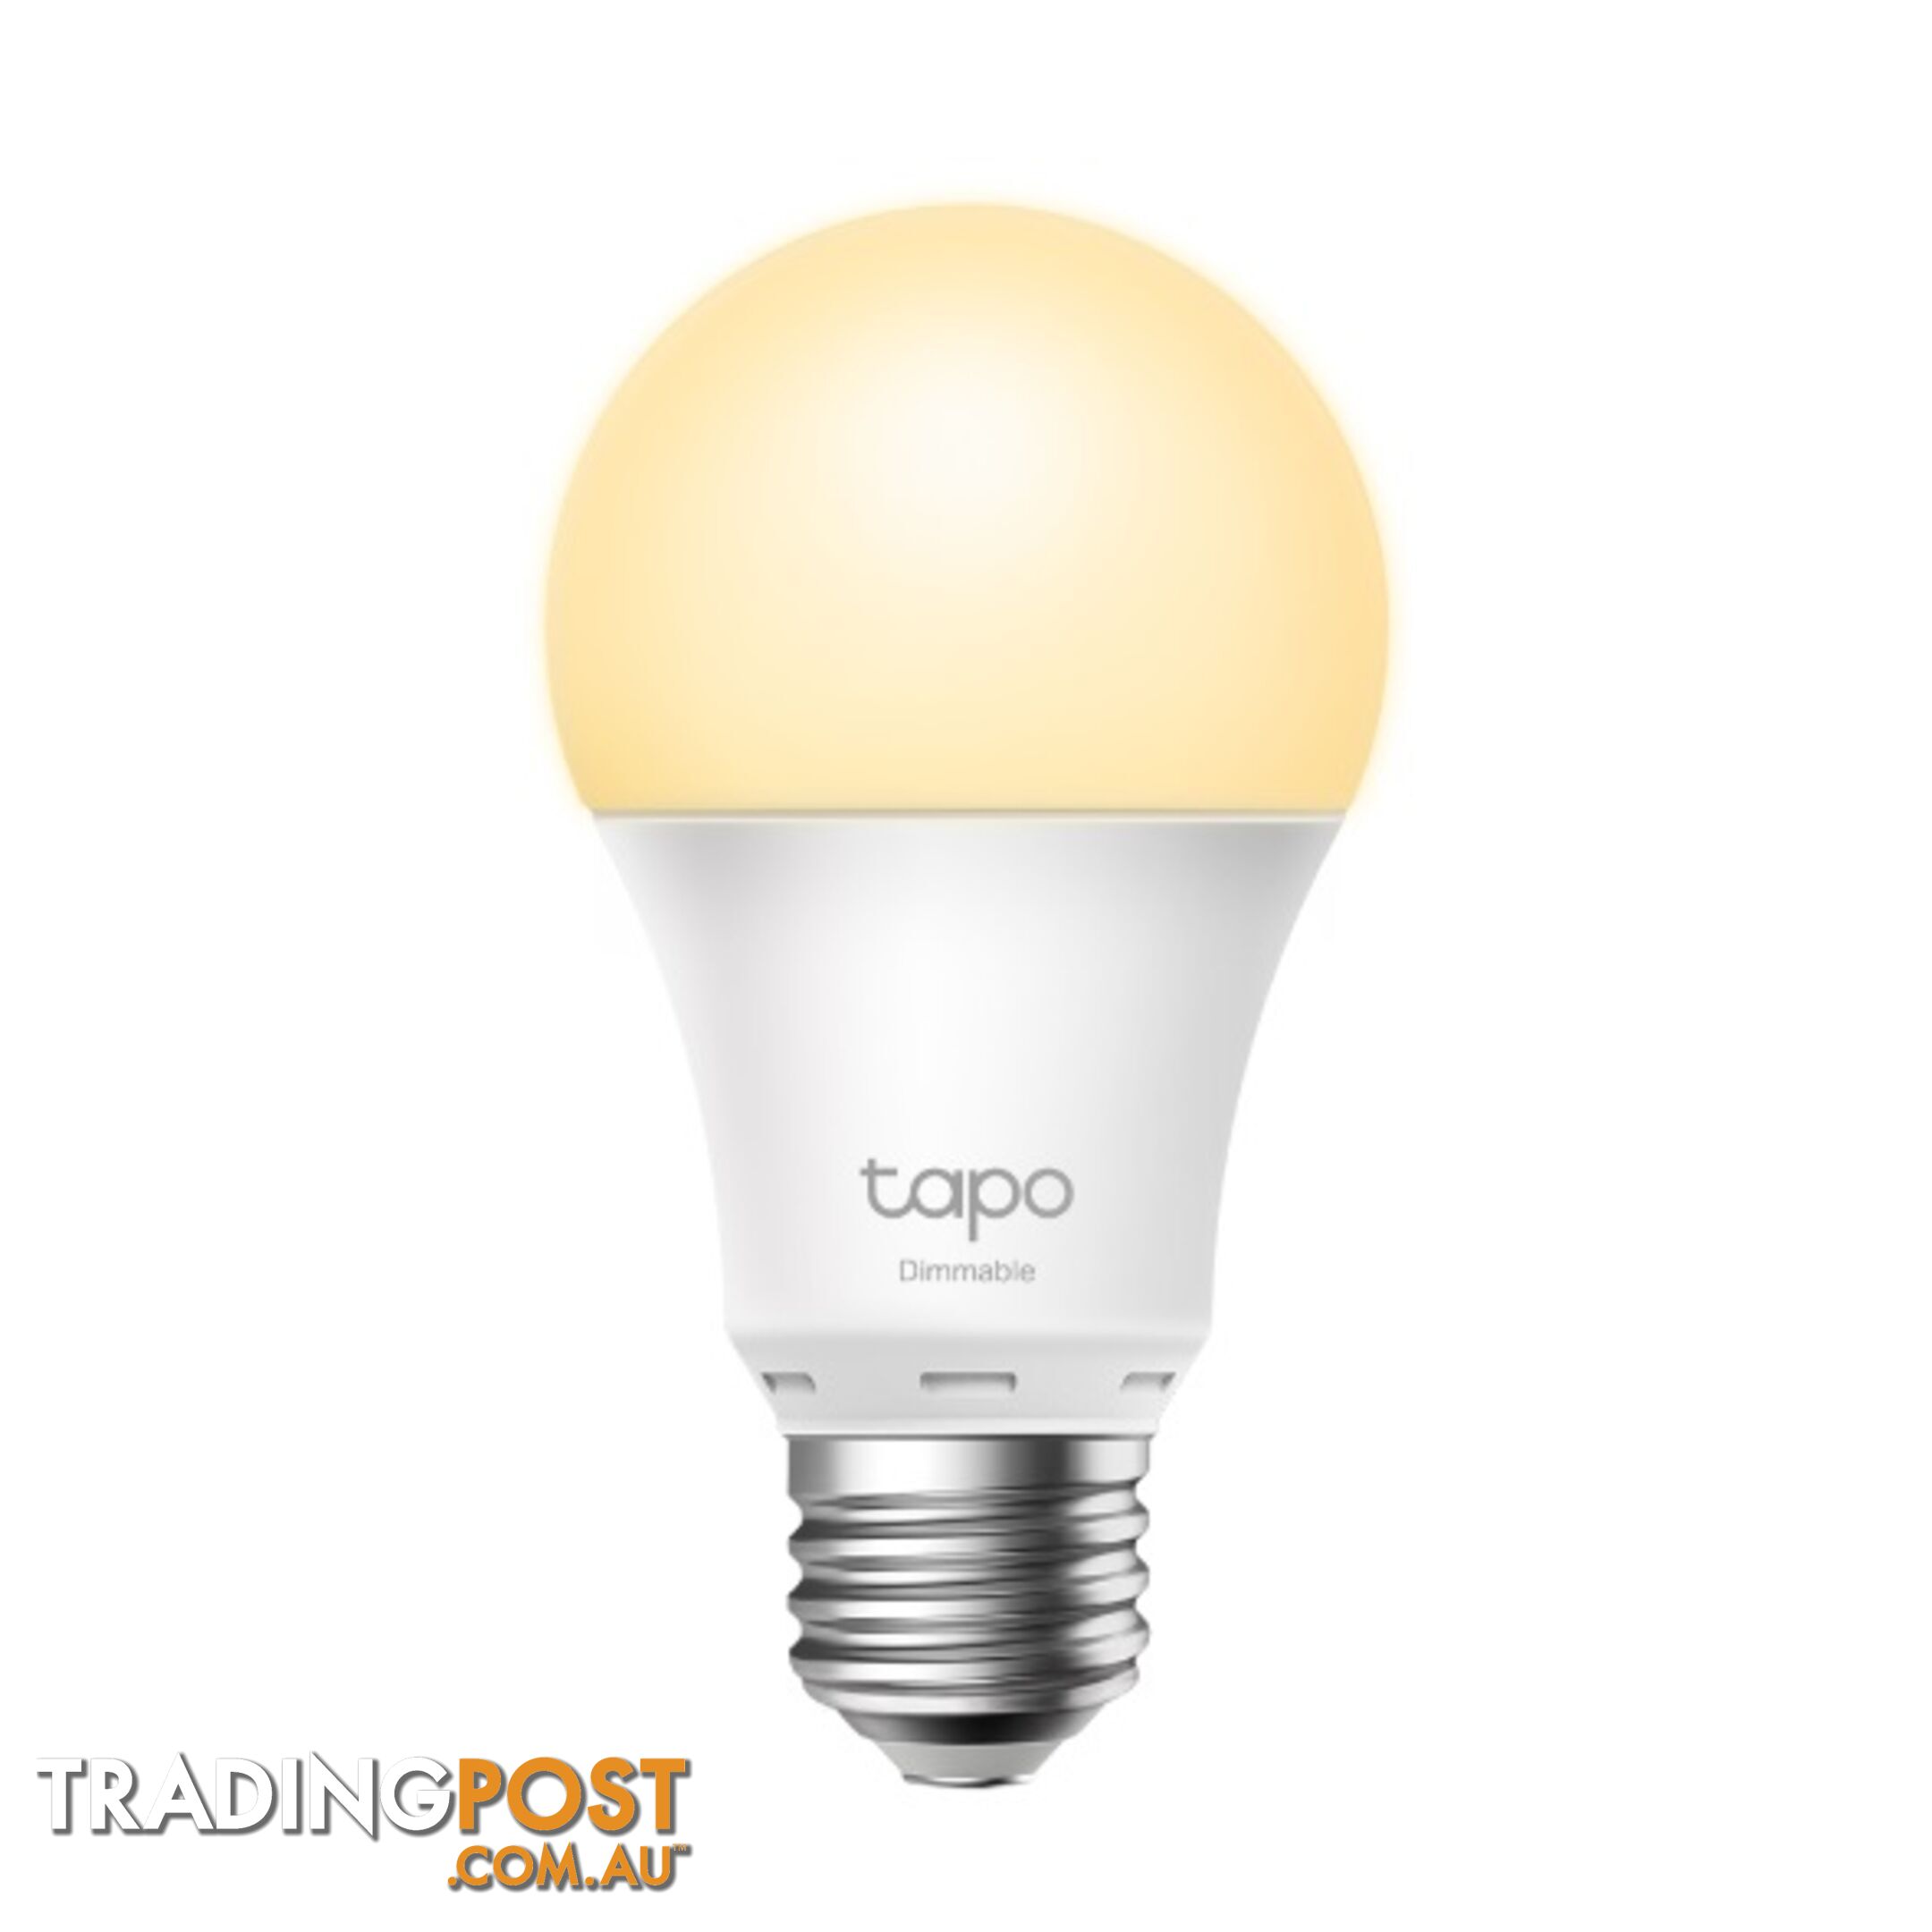 TP-Link Tapo Dimmable Smart Light Bulb L510E Edison Fitting, Dimmable, No Hub Required, Voice Control, Schedule & Timer 2700K 8.7W 2.4 GHz 802.11b/g/n - HETL-TCL510E